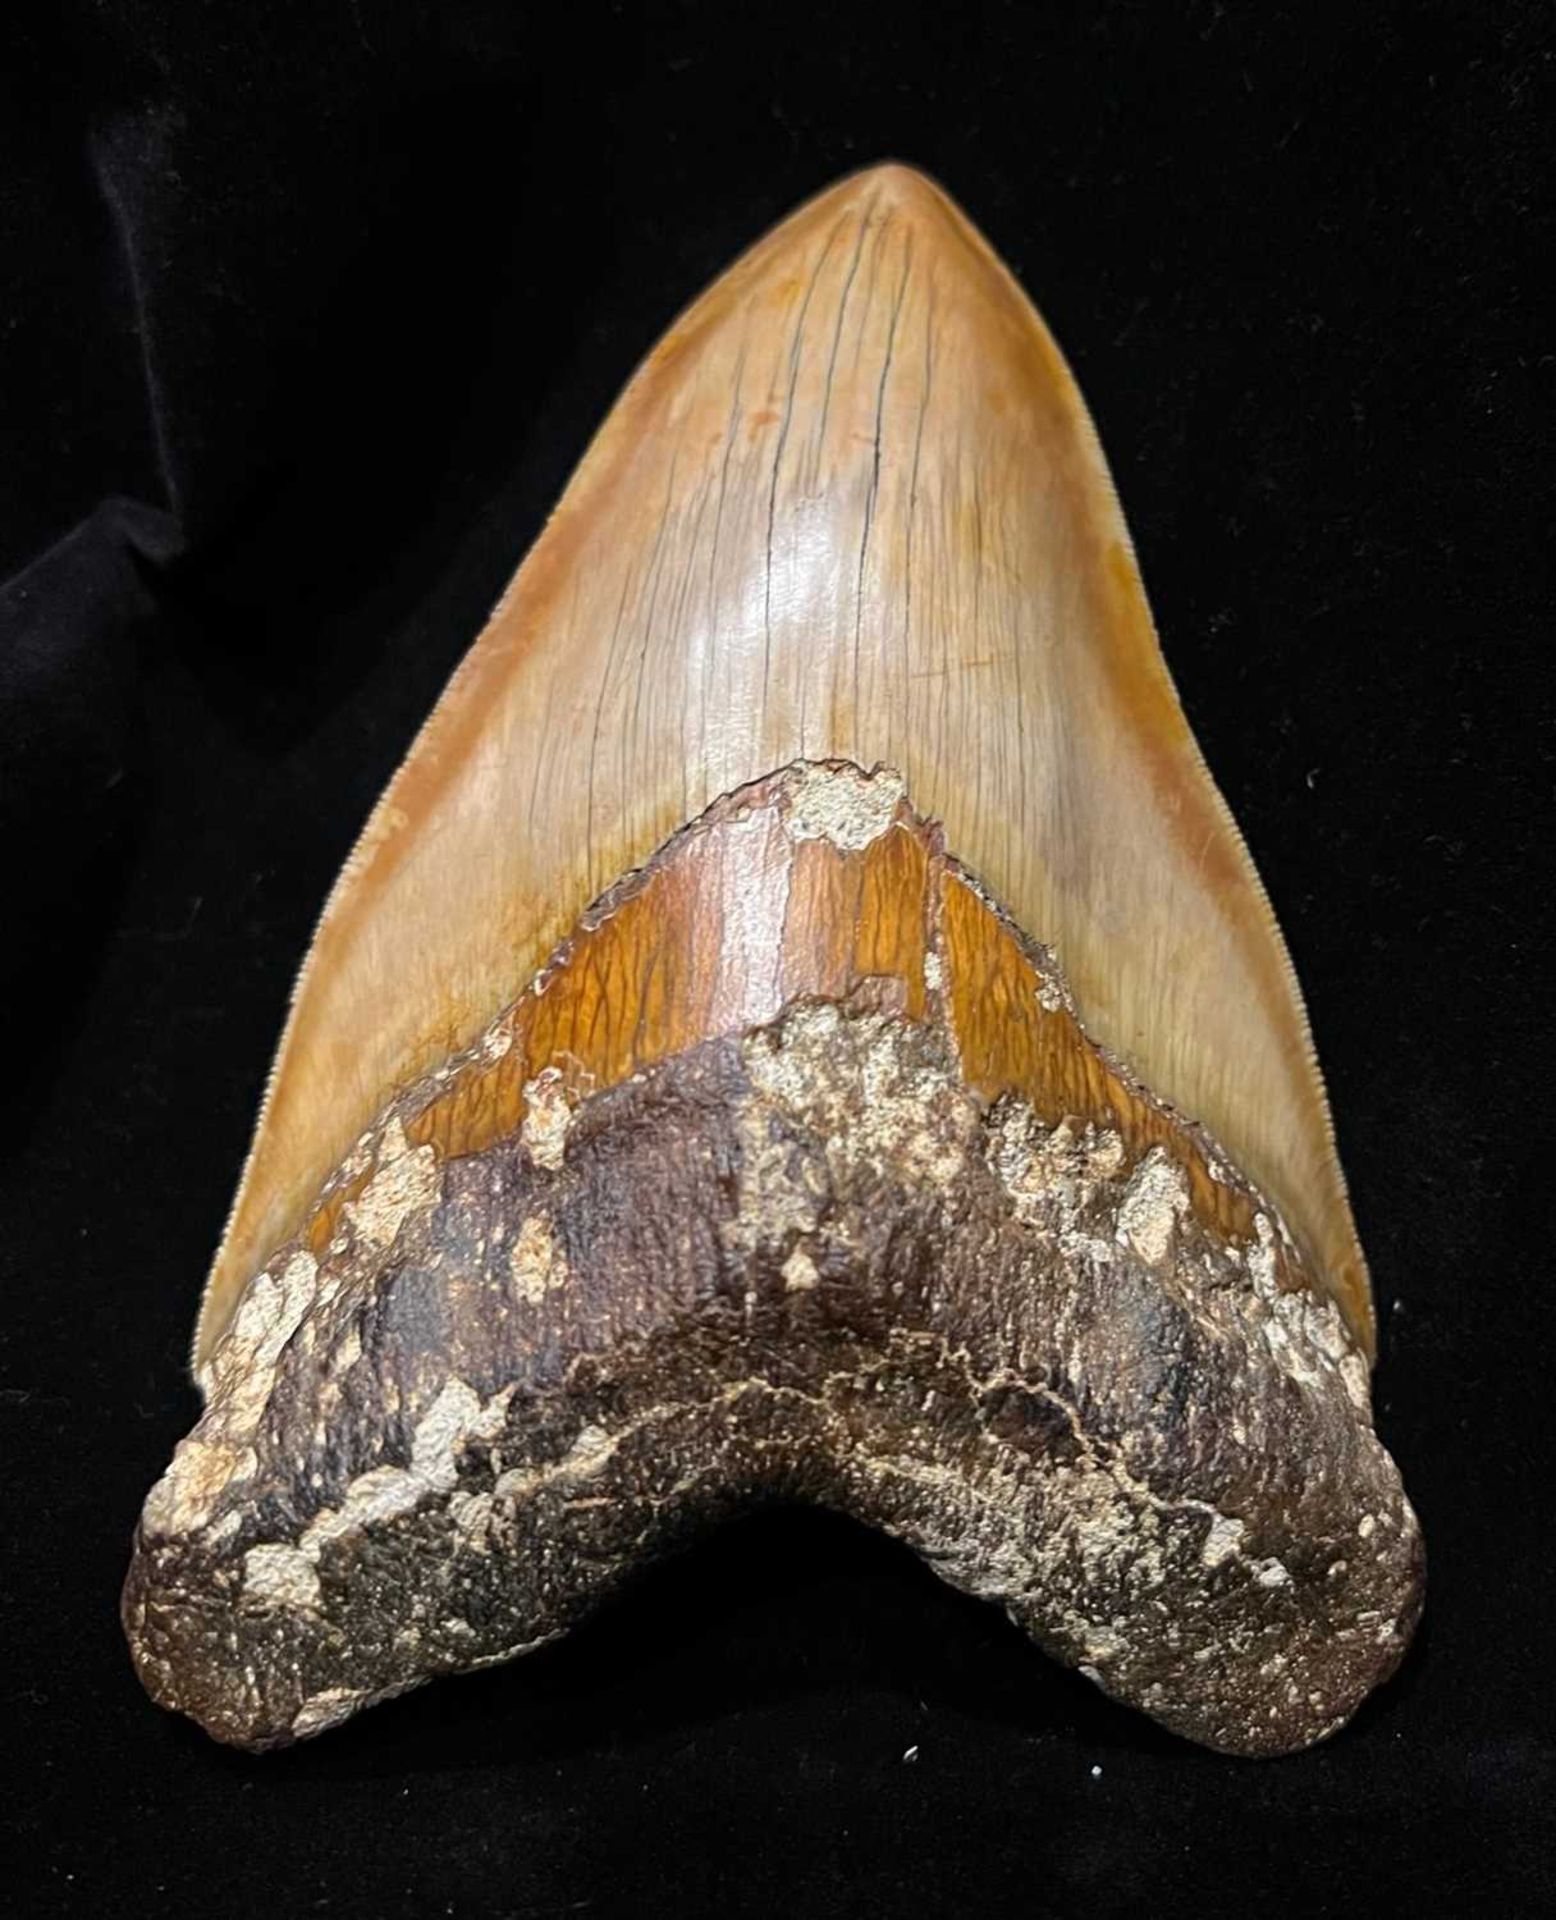 A LARGE FOSSILISED, EXTINCT MEGALODON SHARK TOOTH